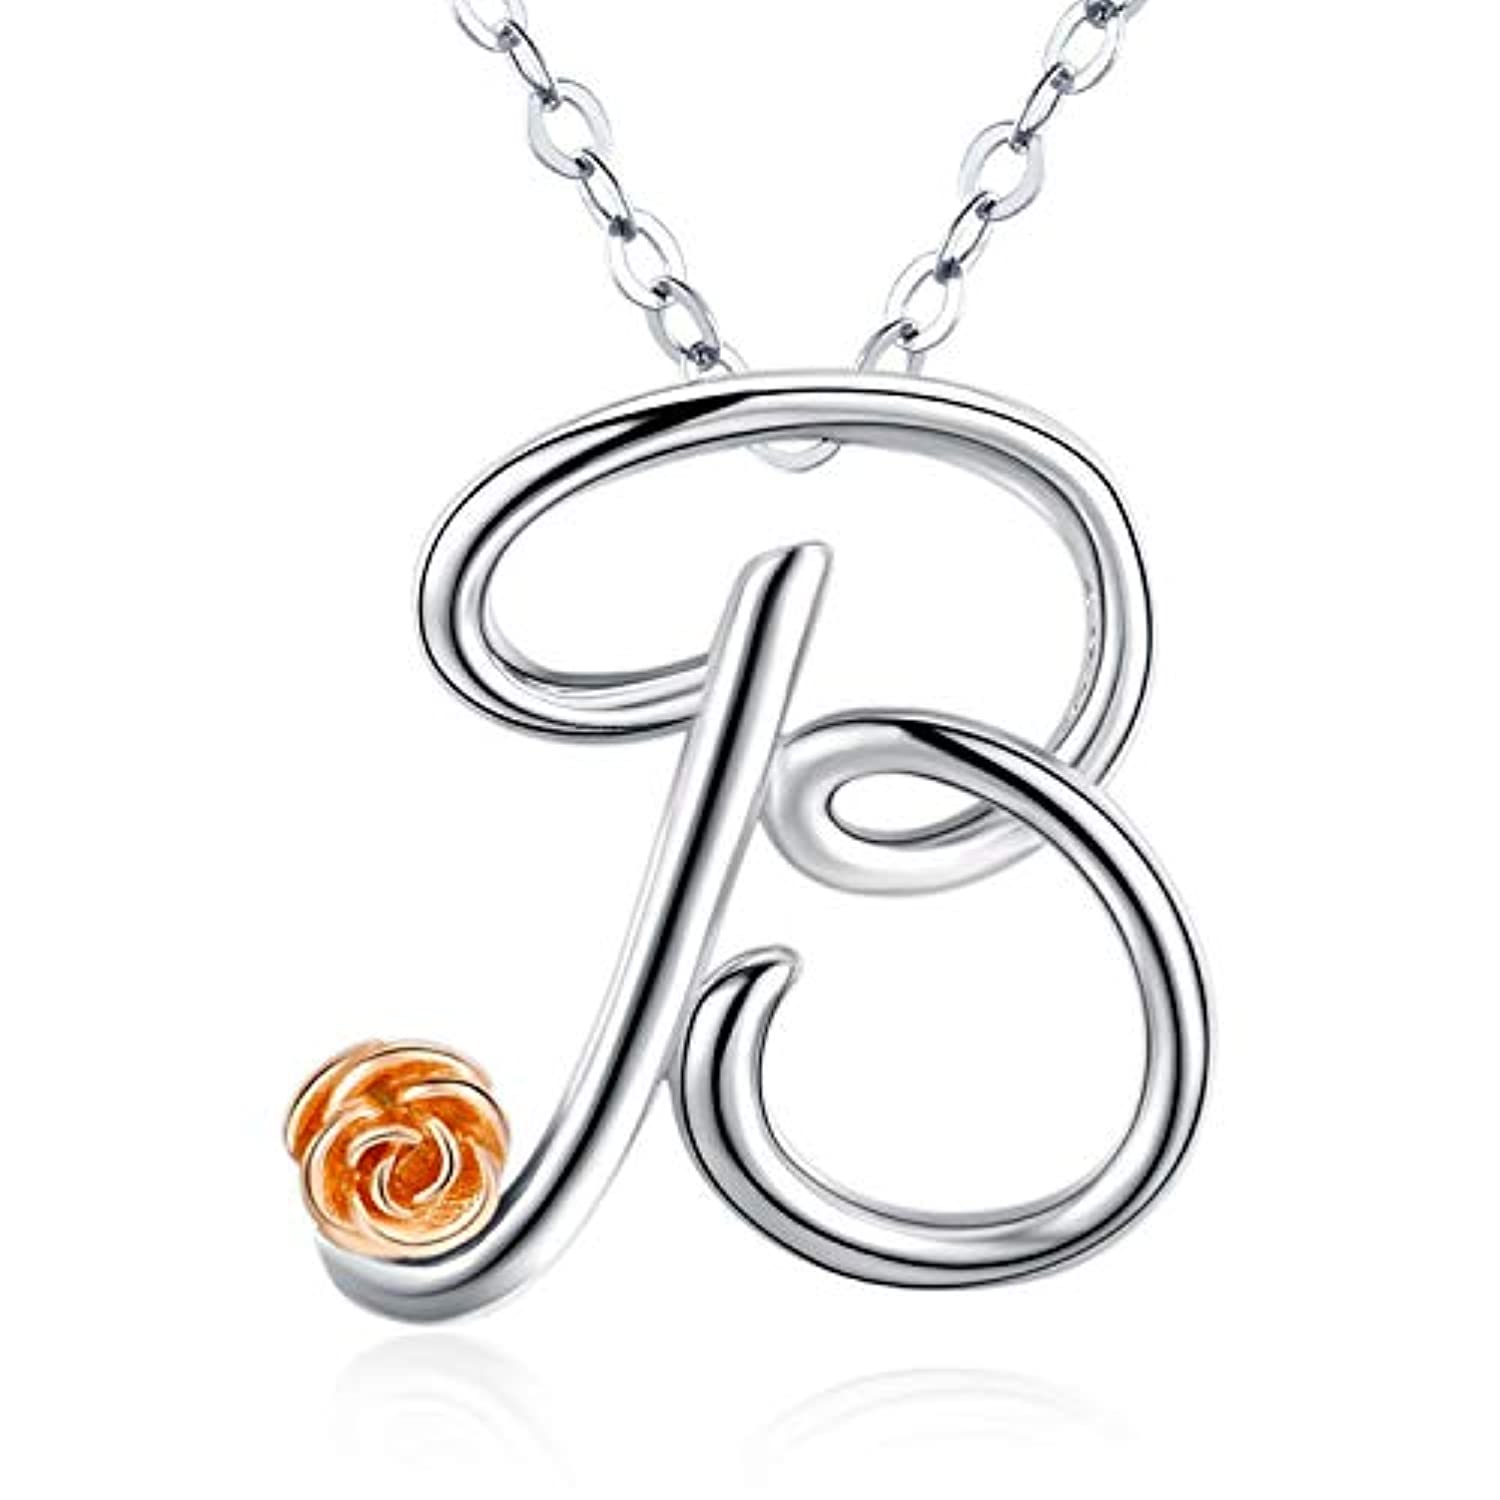 Letter B Pendant Necklace in Silver